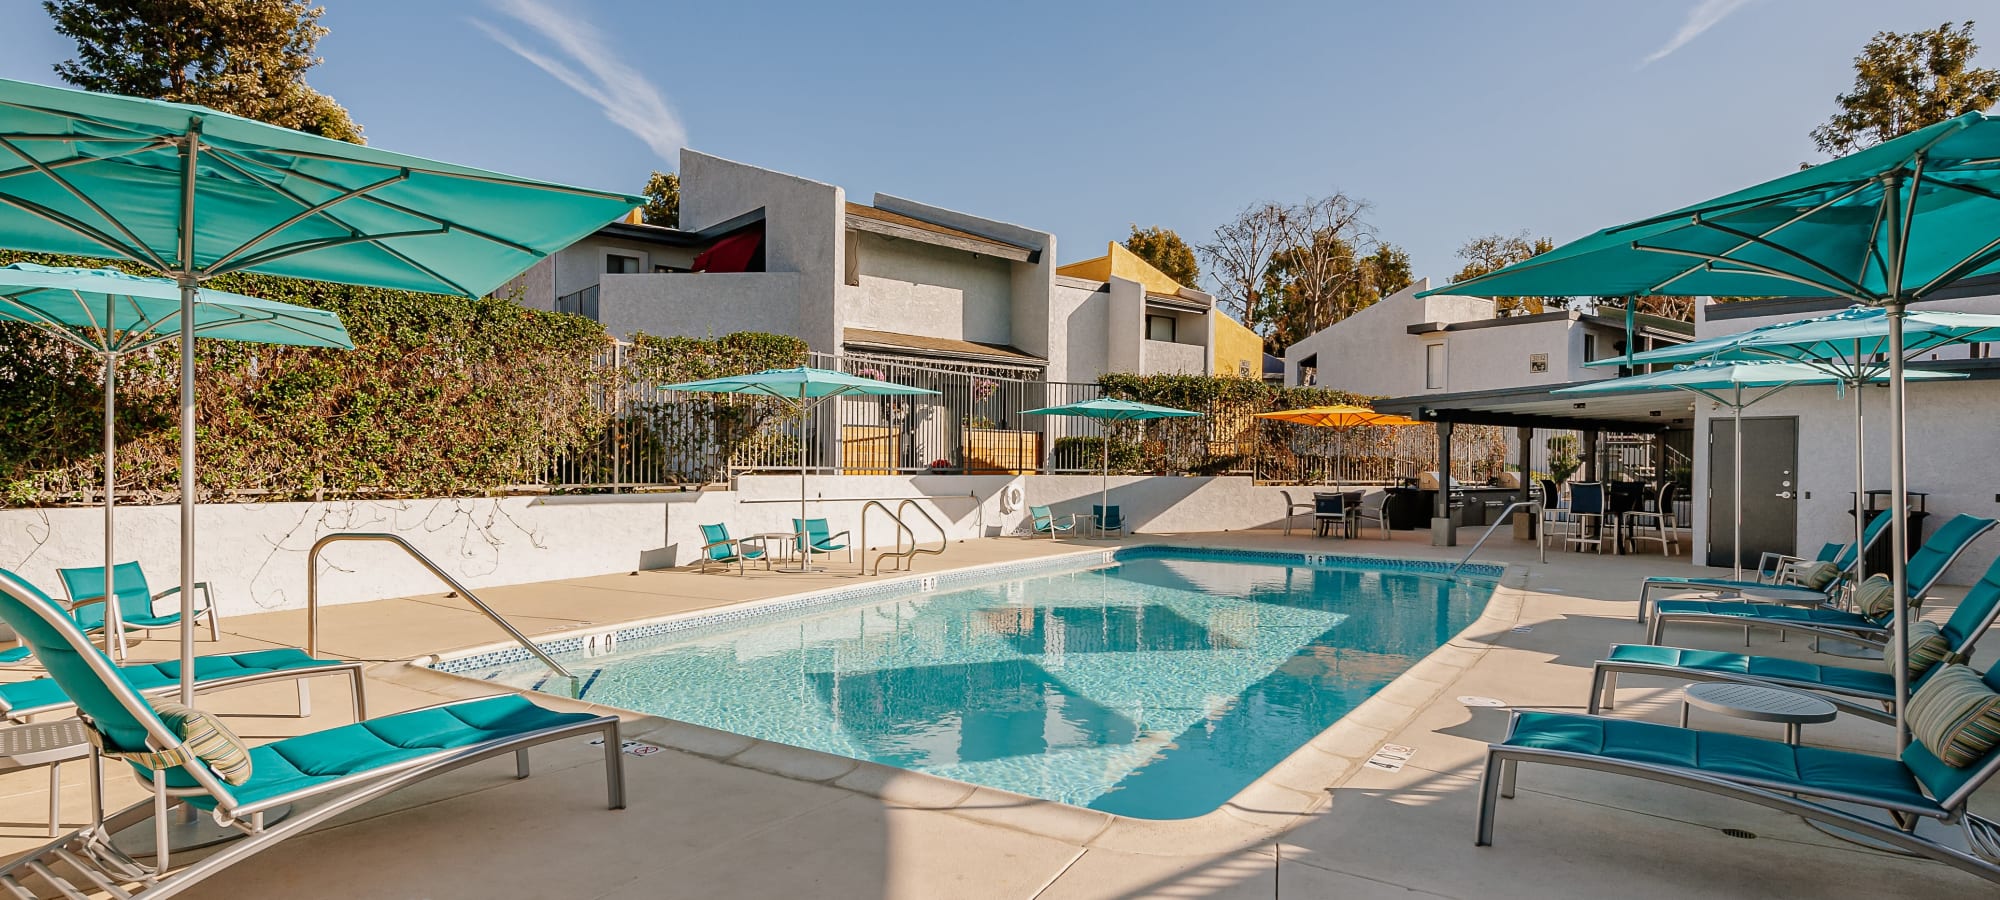 Swimming pool with poolside seating at Reserve at South Coast in Santa Ana, California